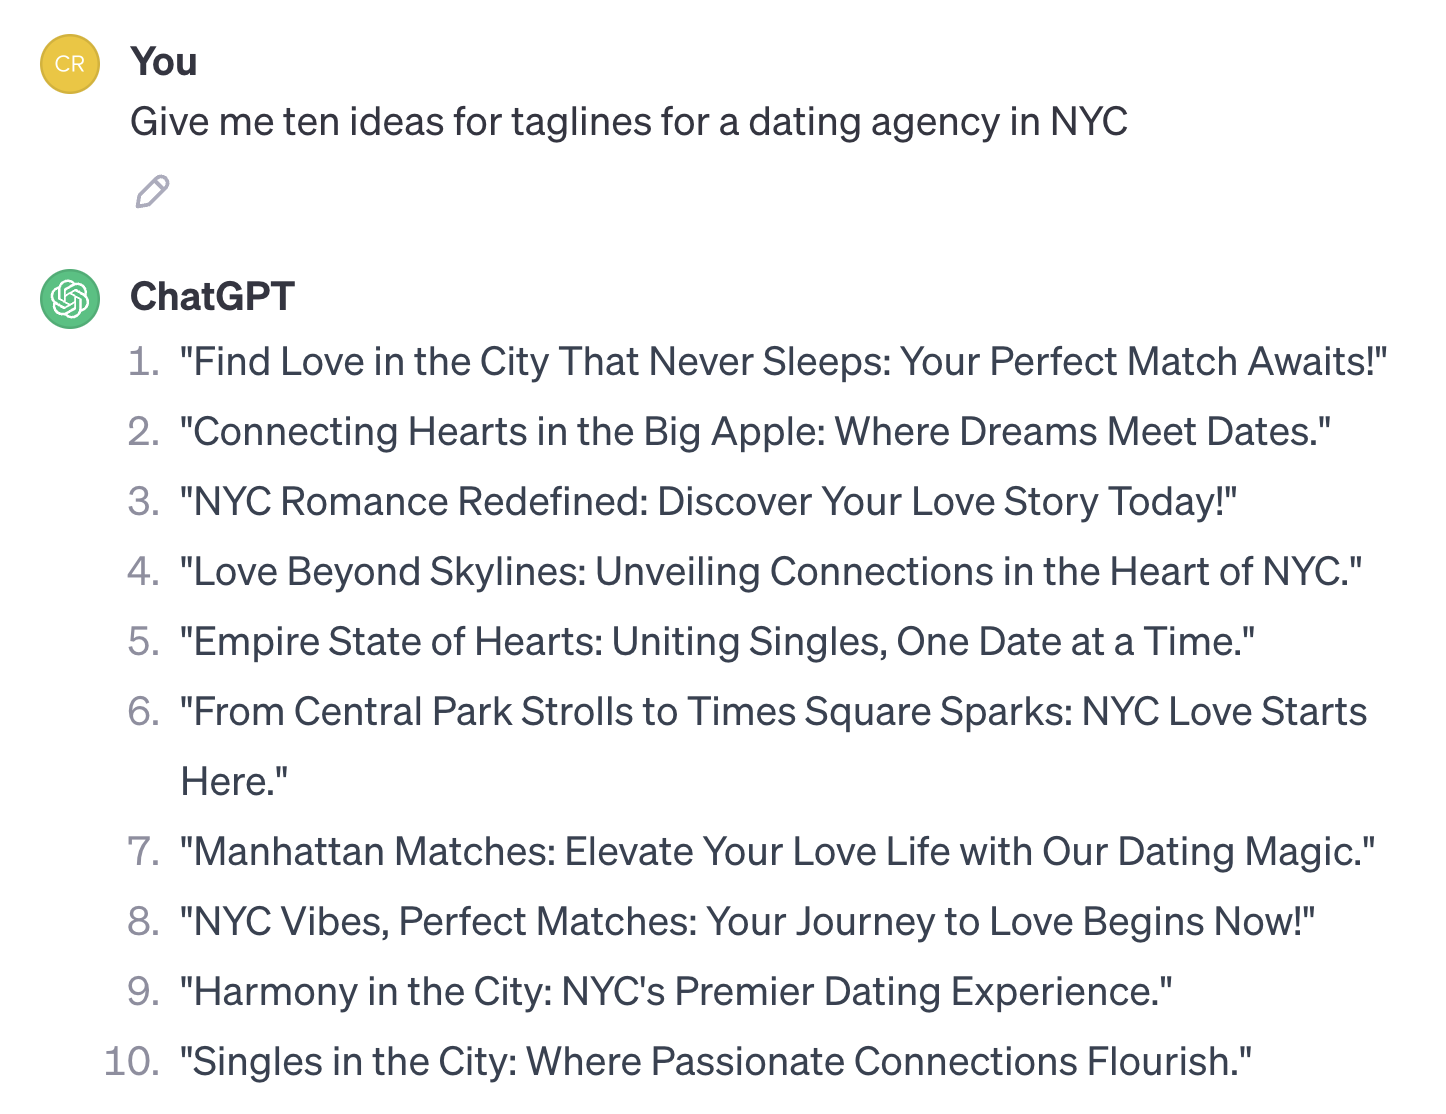 ChatGPT's response to a "Give me ten ideas for taglines for a dating agency in NYC" prompt